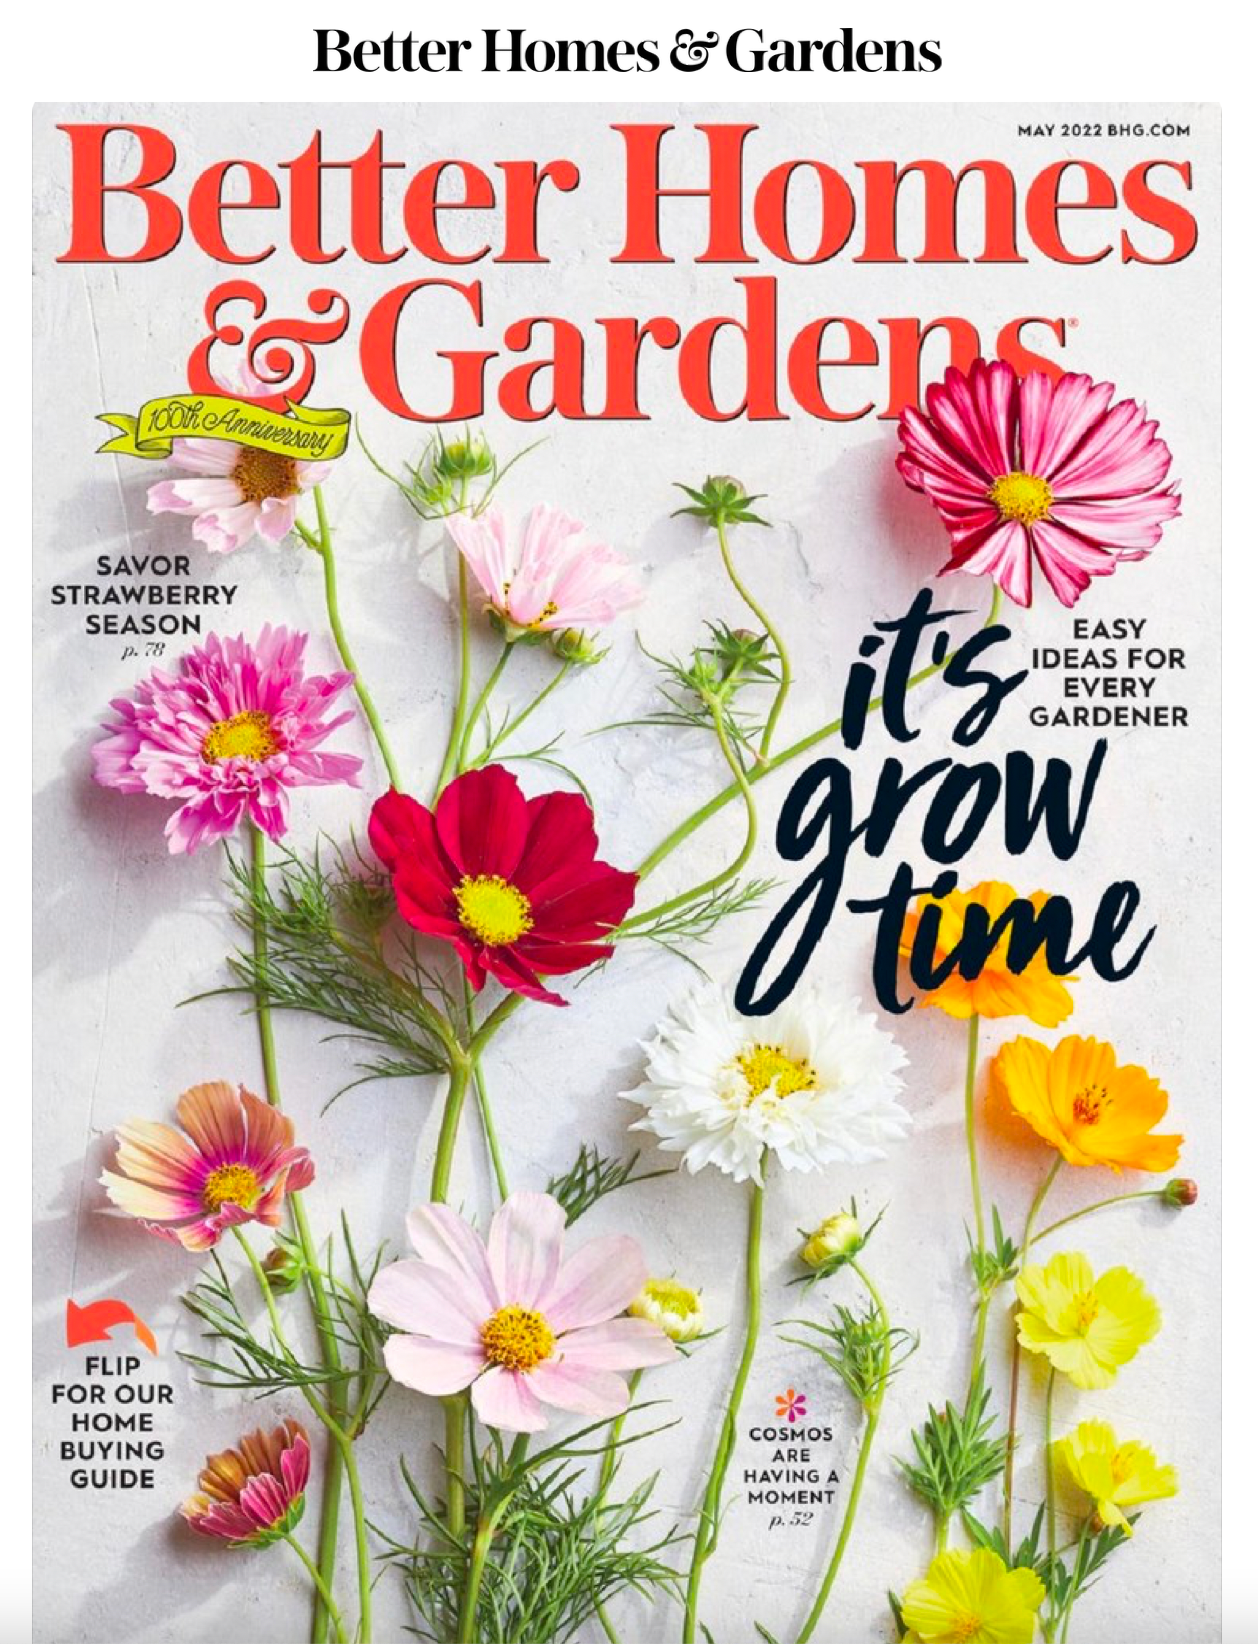 We're in Better Homes & Gardens!